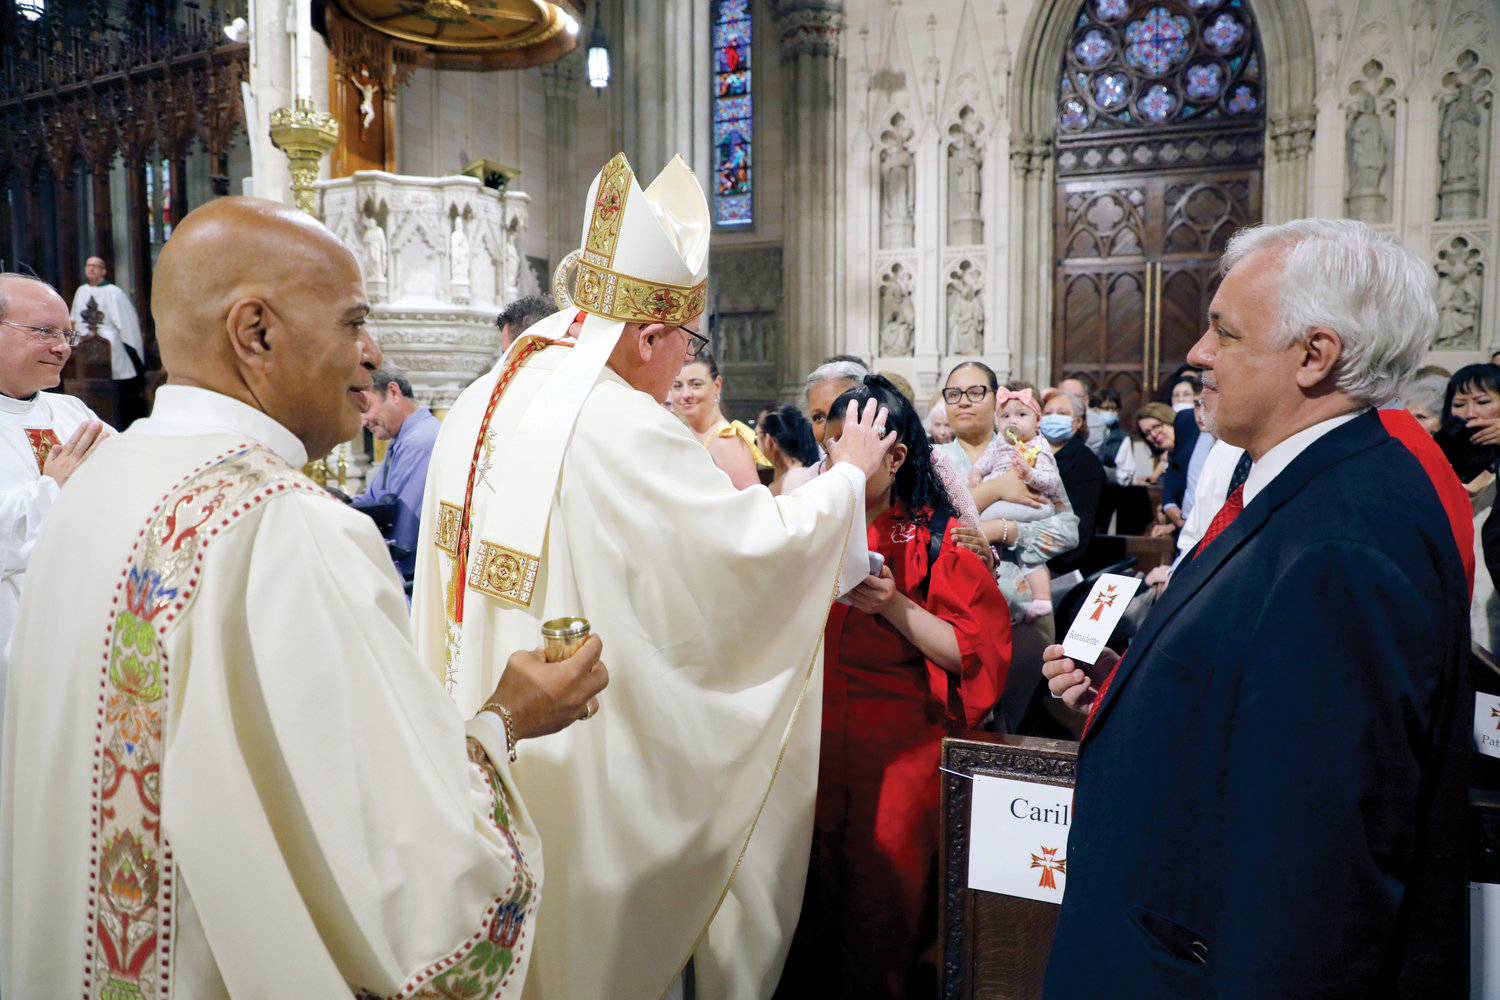 Cardinal Dolan receives assistance from Joe Long, right, director of children’s faith formation, at the Confirmation Mass for Young People with Special Needs last month at St. Patrick's Cathedral. Also shown is Deacon James Bello.